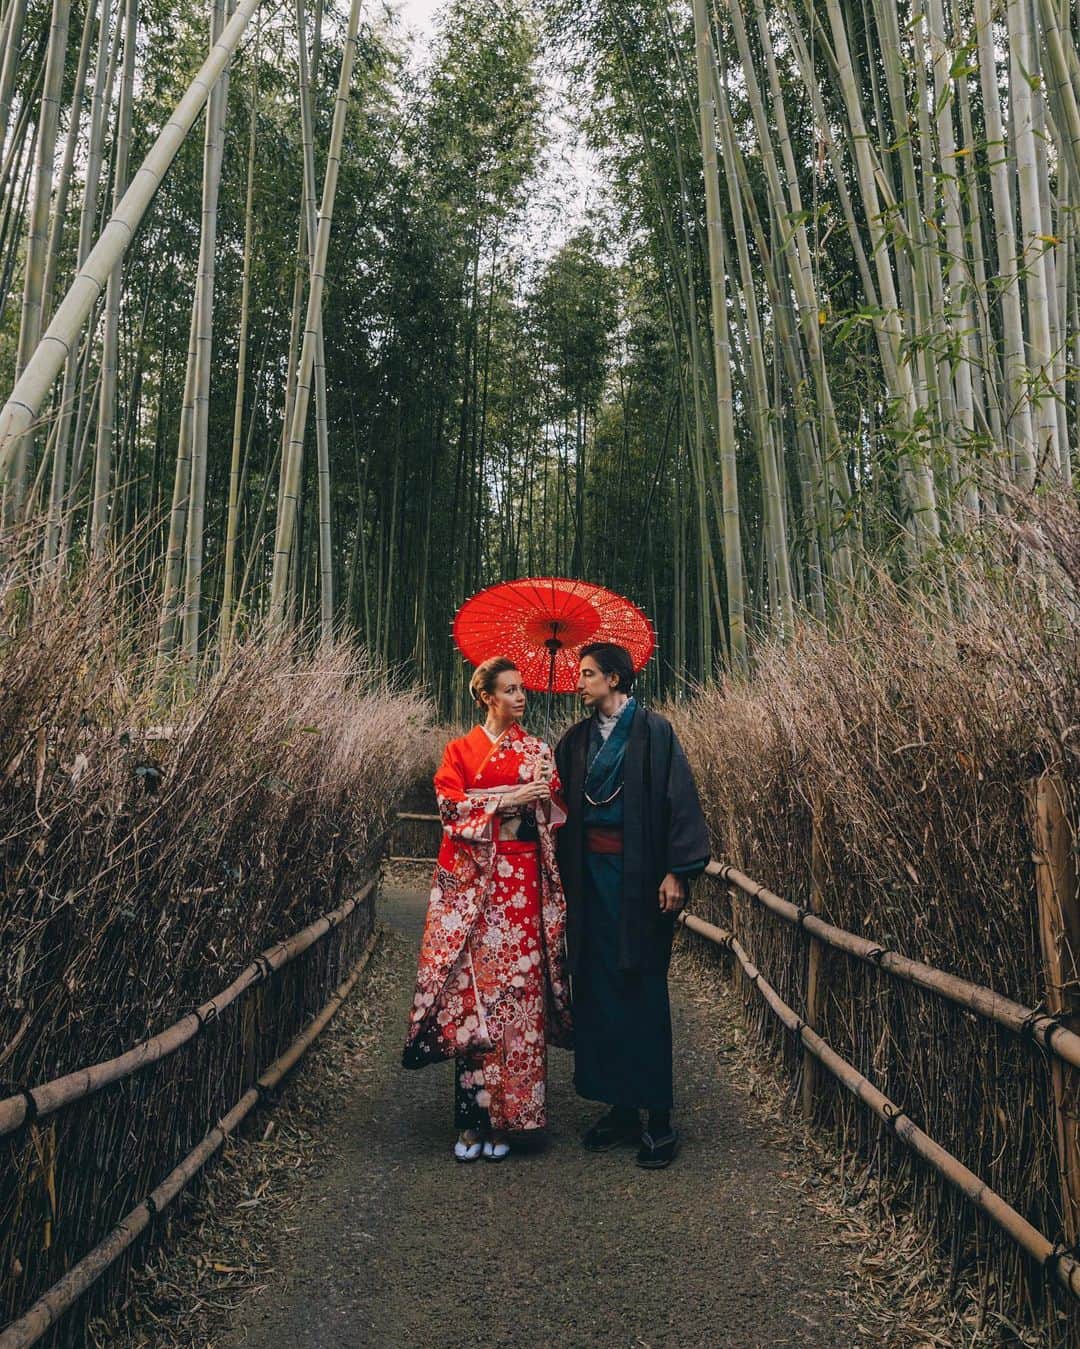 Murad Osmannさんのインスタグラム写真 - (Murad OsmannInstagram)「#followmeto Arashiyama Bamboo Forest in Kyoto with @natalyosmann . Which photo/video you like the most?? We were absolutely mesmerised with this place . Now our dear friend @yana_leventseva said that she knows a hidden gem - location of the Bamboo forest where we will be absolutely alone. Her friend shared this location with her and to our surprise, after several hours of preparations and trying to fit into the local costumes - we arrive at this place - and see thousands of people there - obviously everyone knew about it. We had to be really fast and shoot on the paths of the carriages as we only had 30s for the shot. ▂▂▂▂▂▂▂▂▂▂▂▂▂▂▂▂▂▂▂▂ Итак мы наконец-то попали в любимый город Киото. Первый раз приехали туда во время осеннего листопада. Город невероятно преображается и превращается в сказку окрашенную огненно-красными и оранжево-желтыми тонами. Наша дорогая подруга Яна была уверена, что ей подсказали гениальное заброшенное место в бамбуковом лесу. Как мы понимаете, нашему удивлению не было предела - когда, после нескольких часов подготовки к кадру и переодеваний в местную одежду, приехав туда - мы обнаружили тысячи туристов. Тем не менее мы не растерялись и нашли уголок где проезжали повозки - уложившись в 30 секунд на кадр, так как иначе мы бы блокировали путь.」12月4日 2時03分 - muradosmann